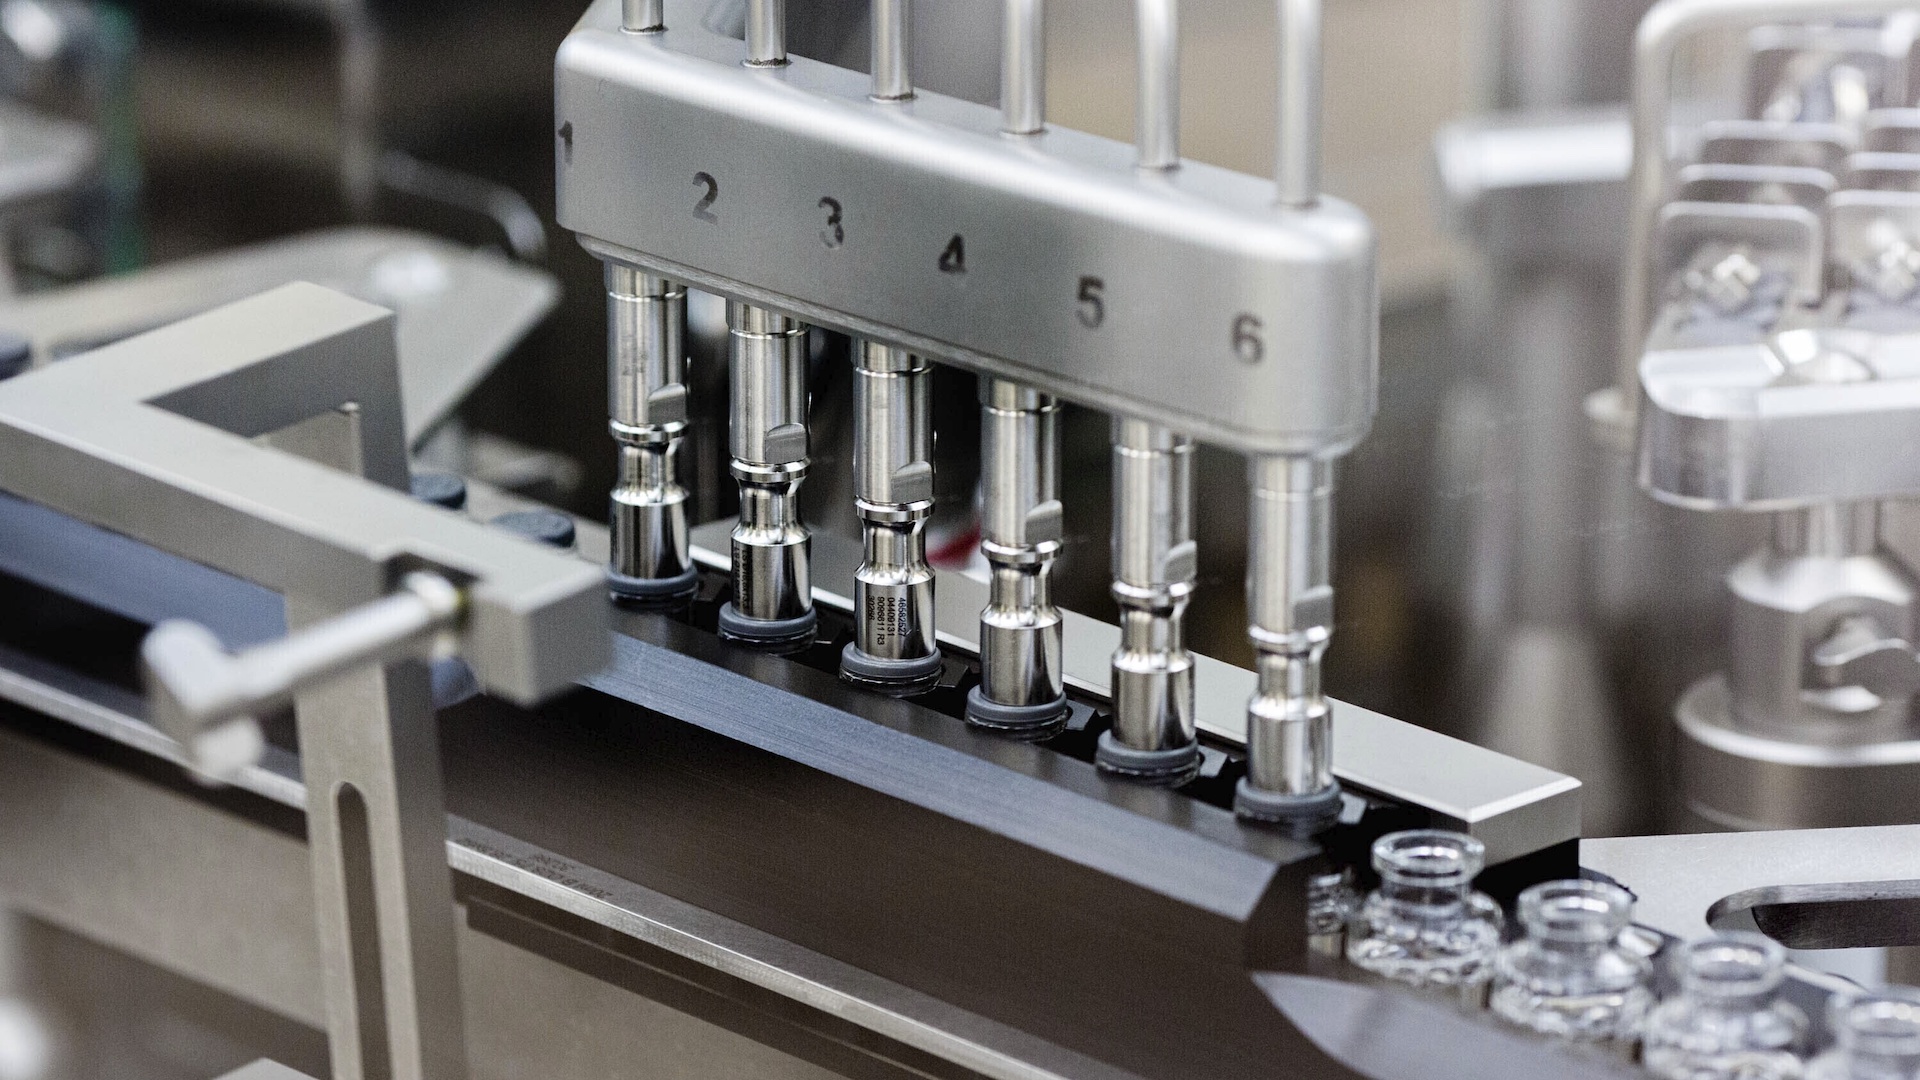 In this March 2020 photo provided by Gilead Sciences, rubber stoppers are placed onto filled vials of the investigational drug remdesivir at a Gilead manufacturing site in the United States. (Gilead Sciences via AP)